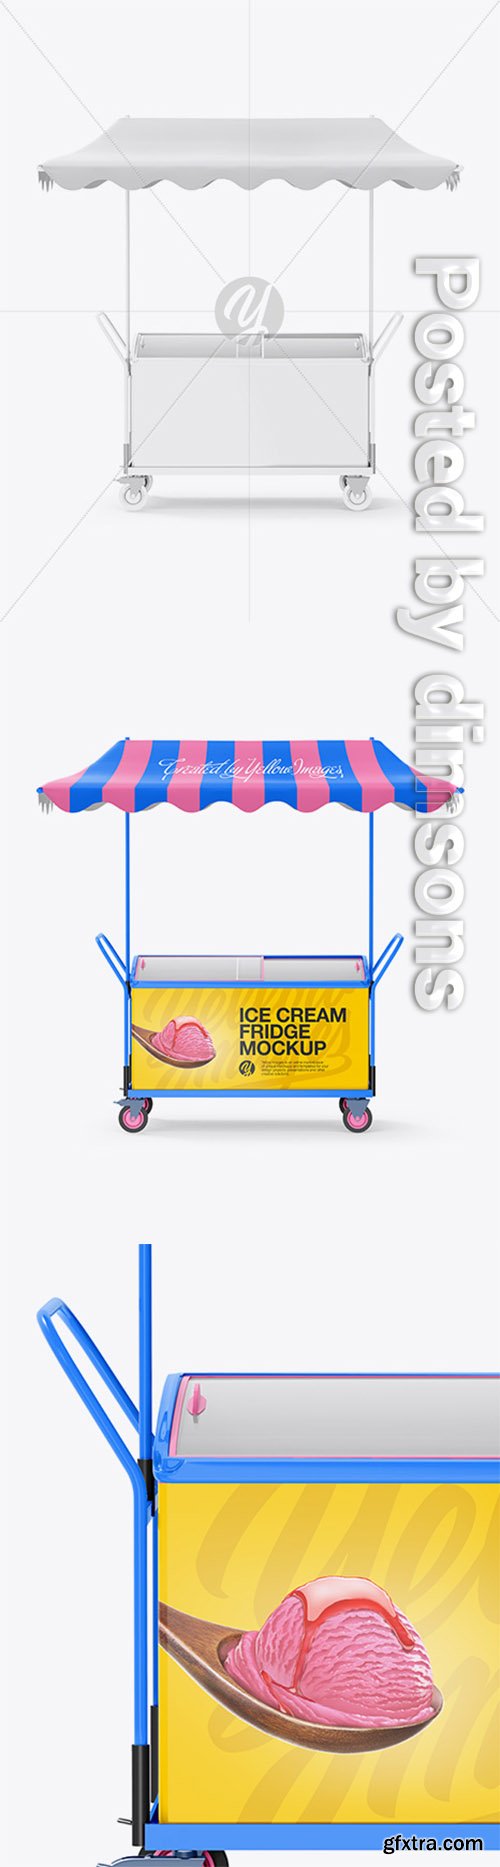 Ice Cream Fridge With Awning Mockup - Front View 19563